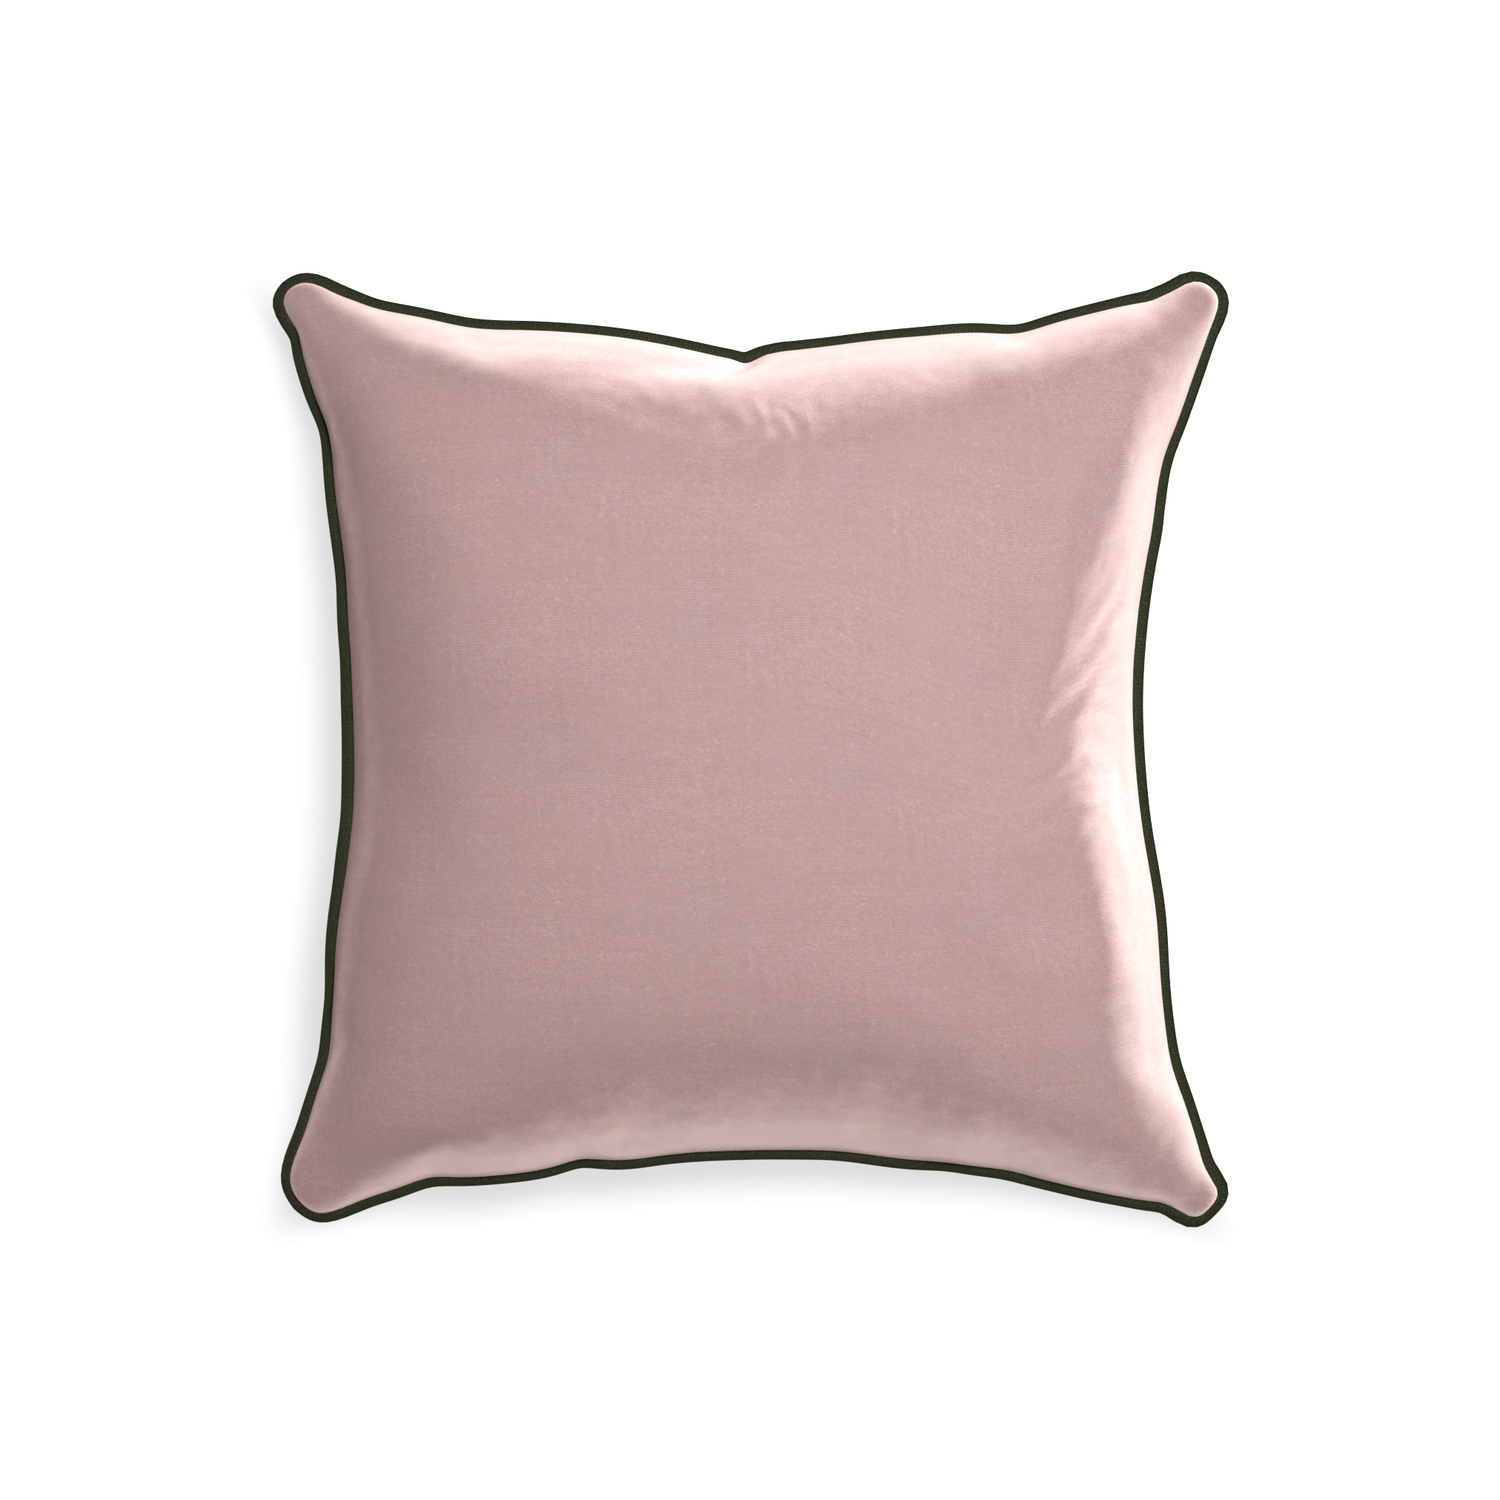 square mauve velvet pillow with fern green piping